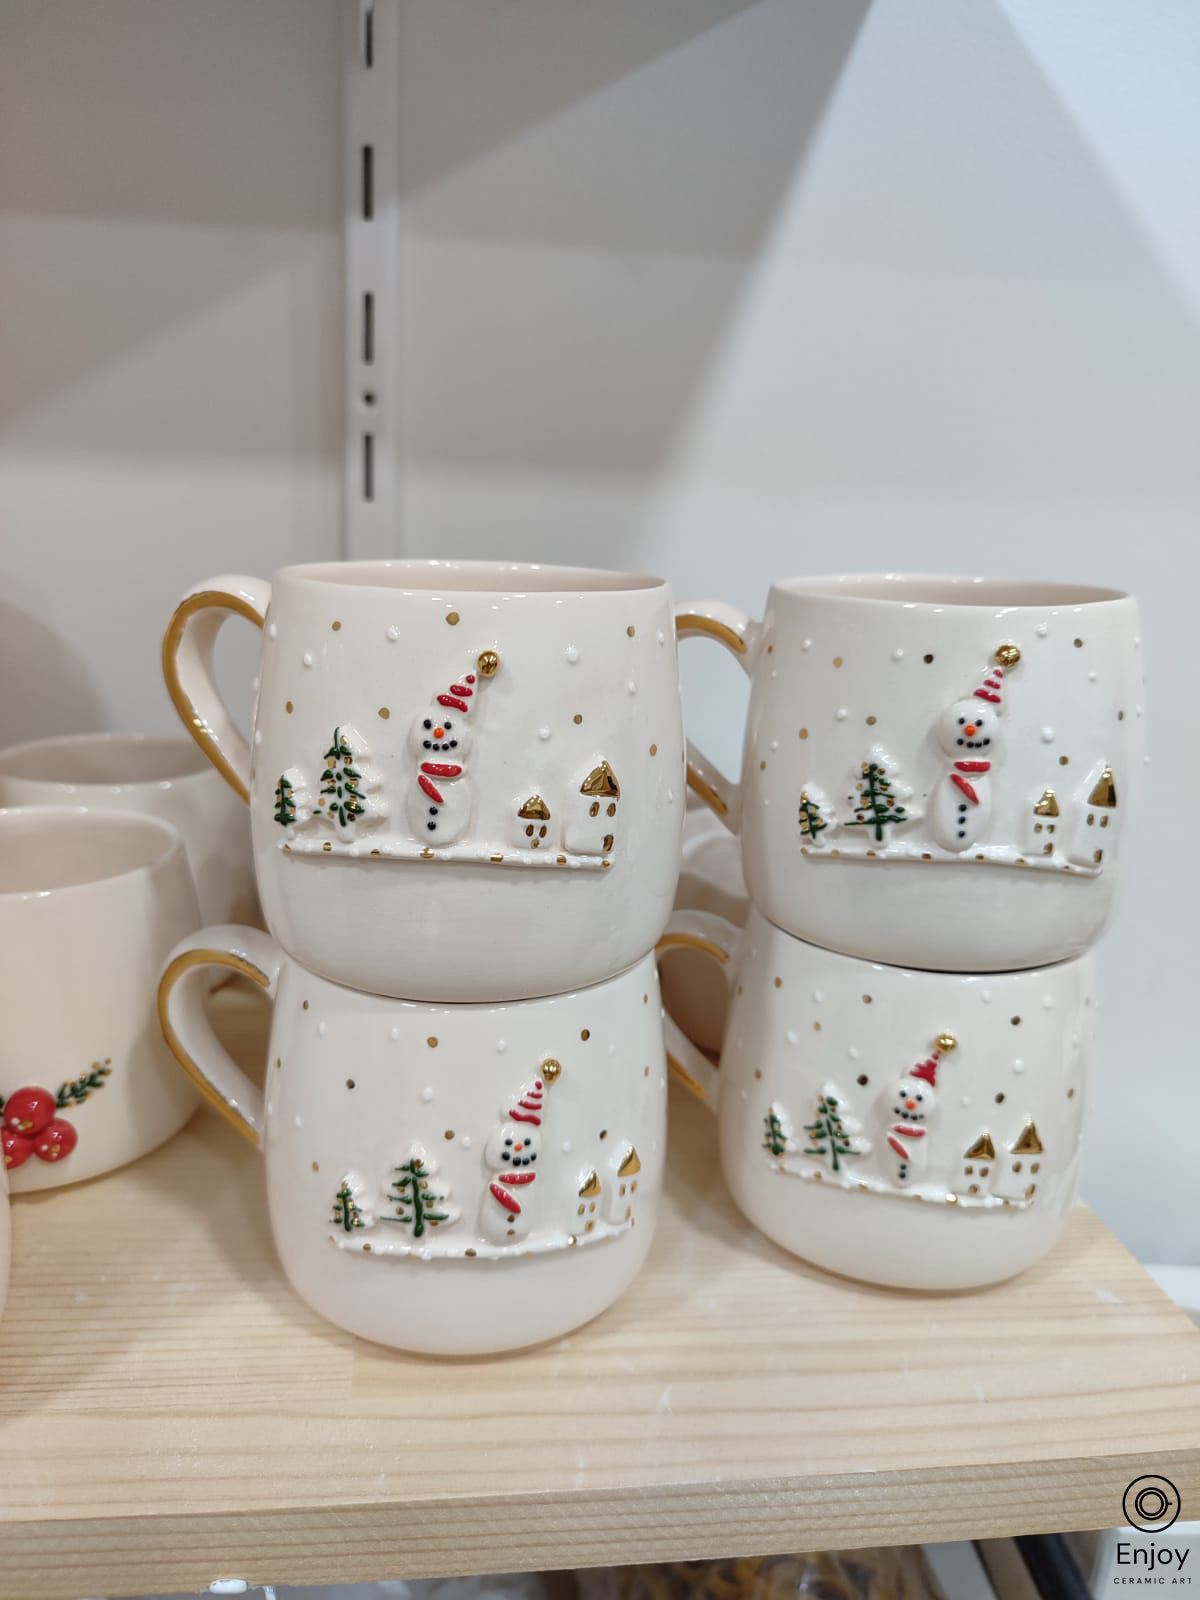 A chic white mugs adorned with a 3D snowman, little houses, trees with gold details on a shelve